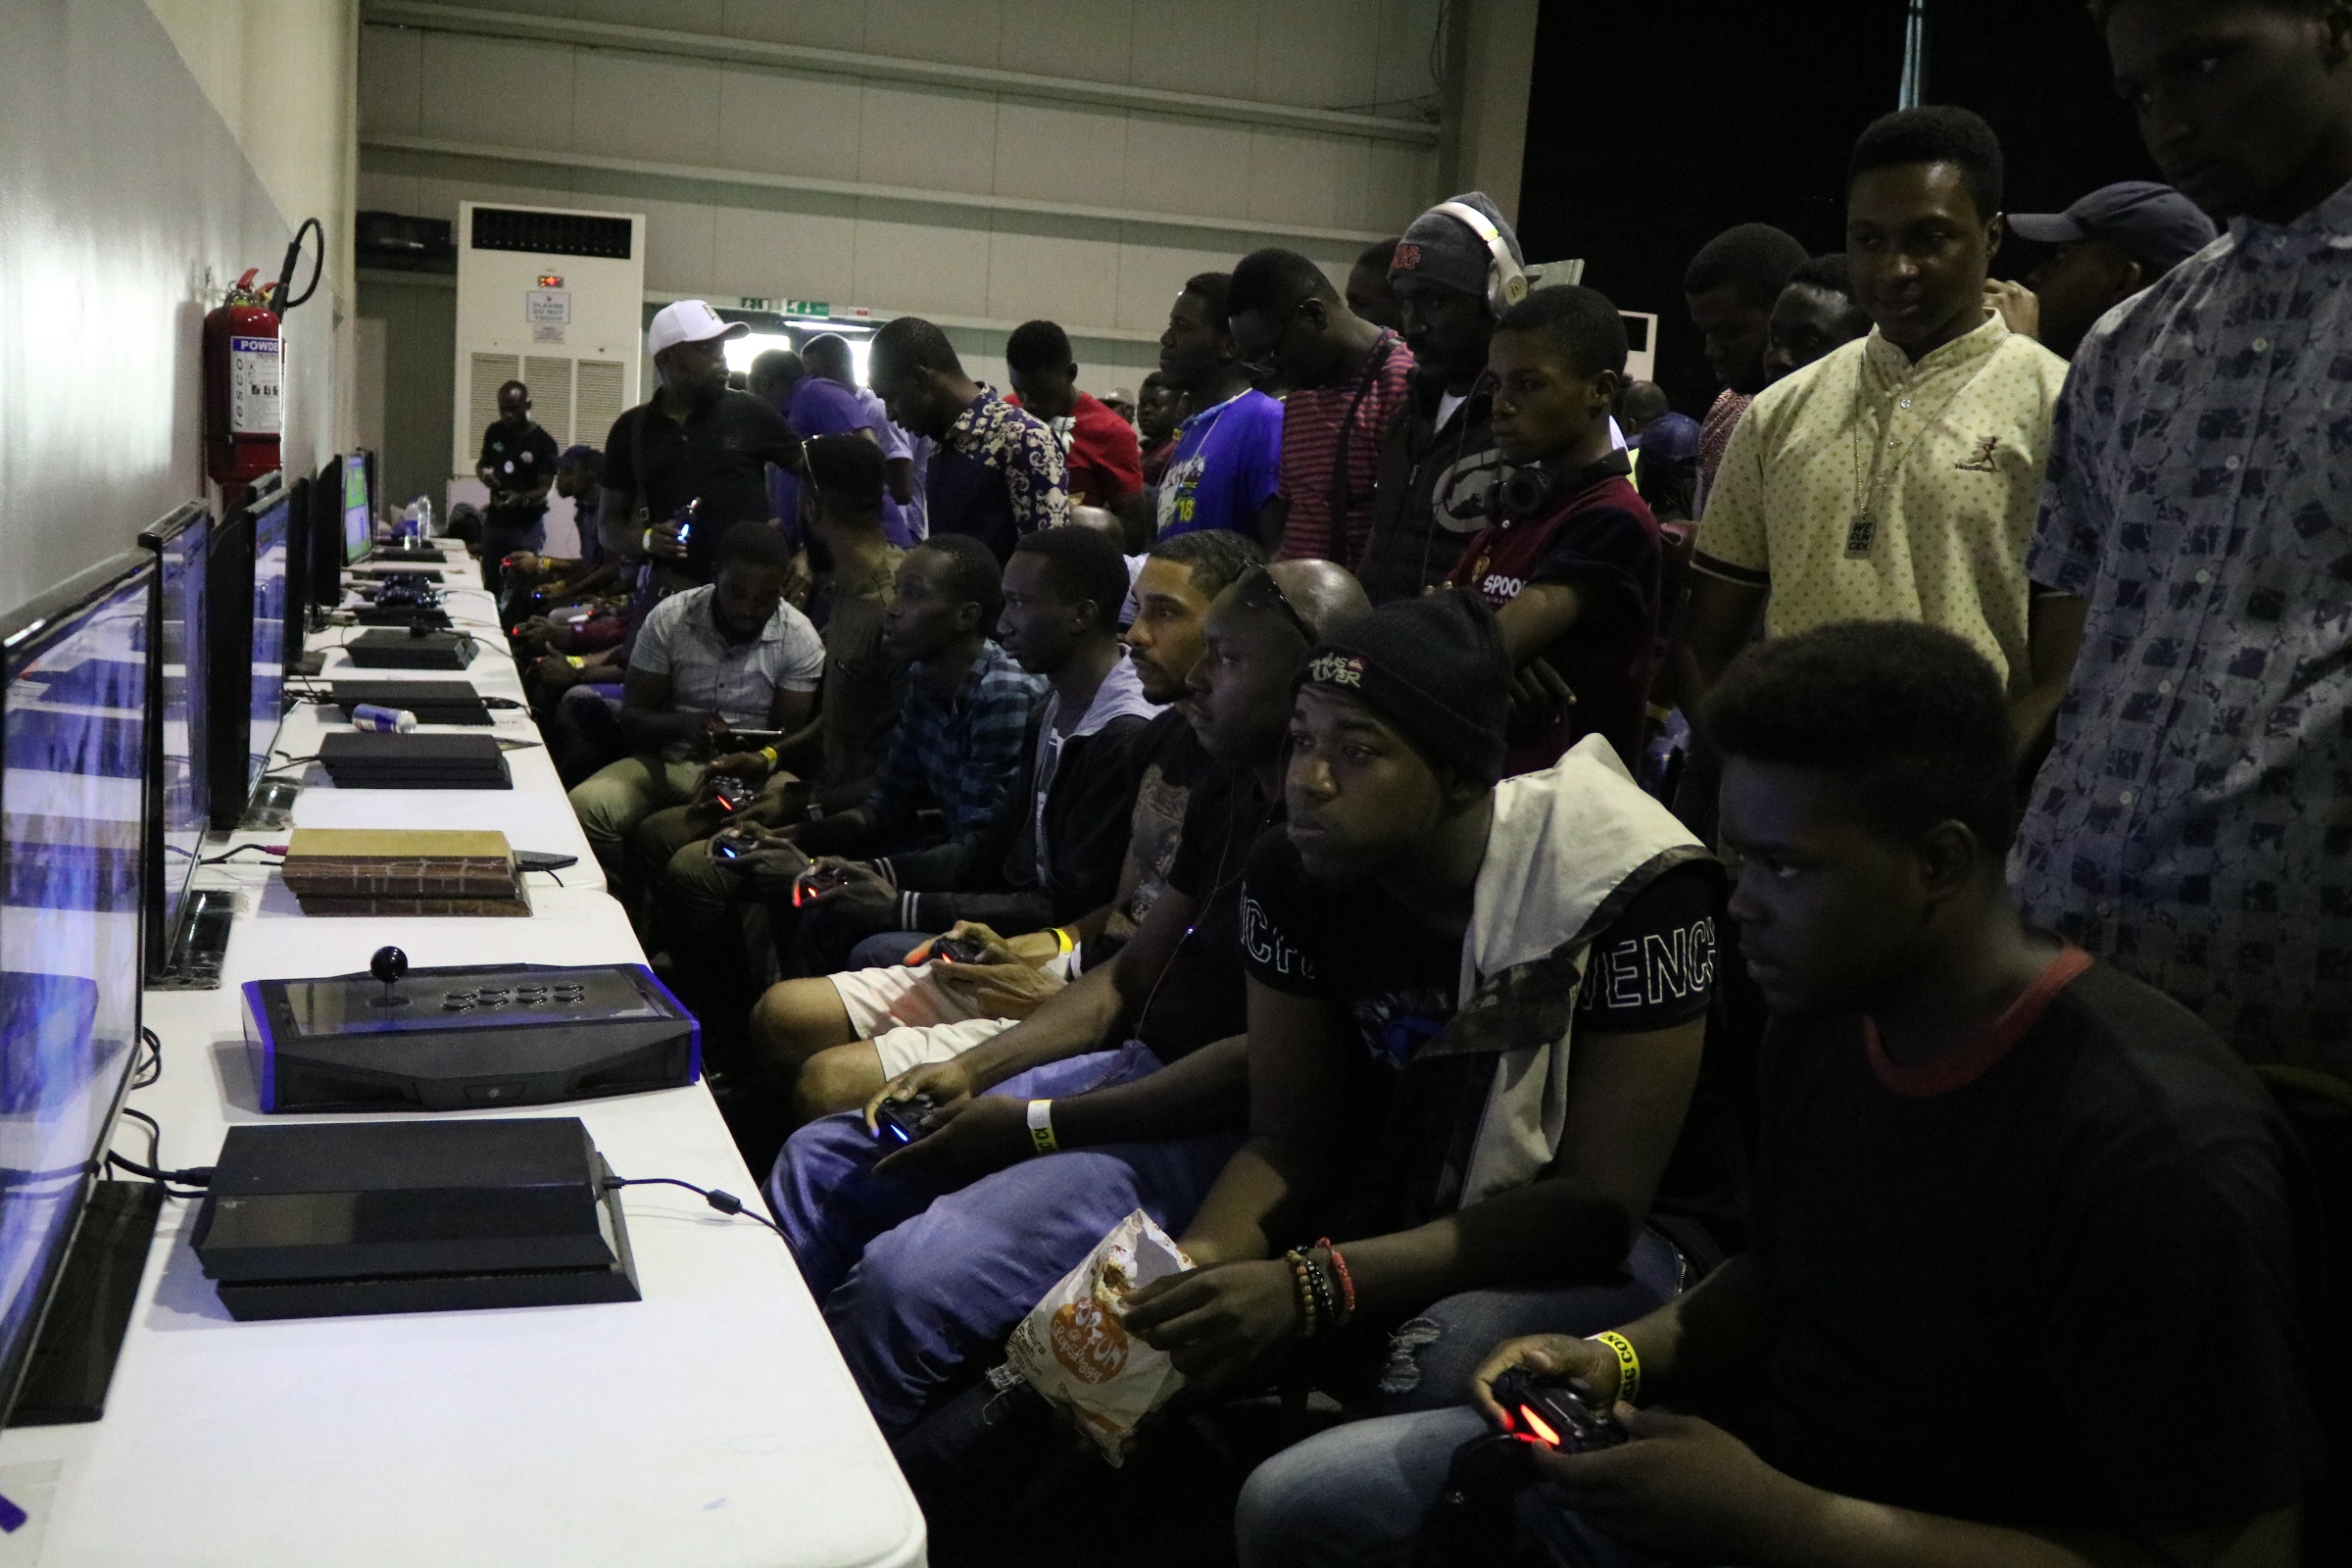 IMG 9529 - Lagos Comic Con 2019: Dates, How To Register For Free And More Details